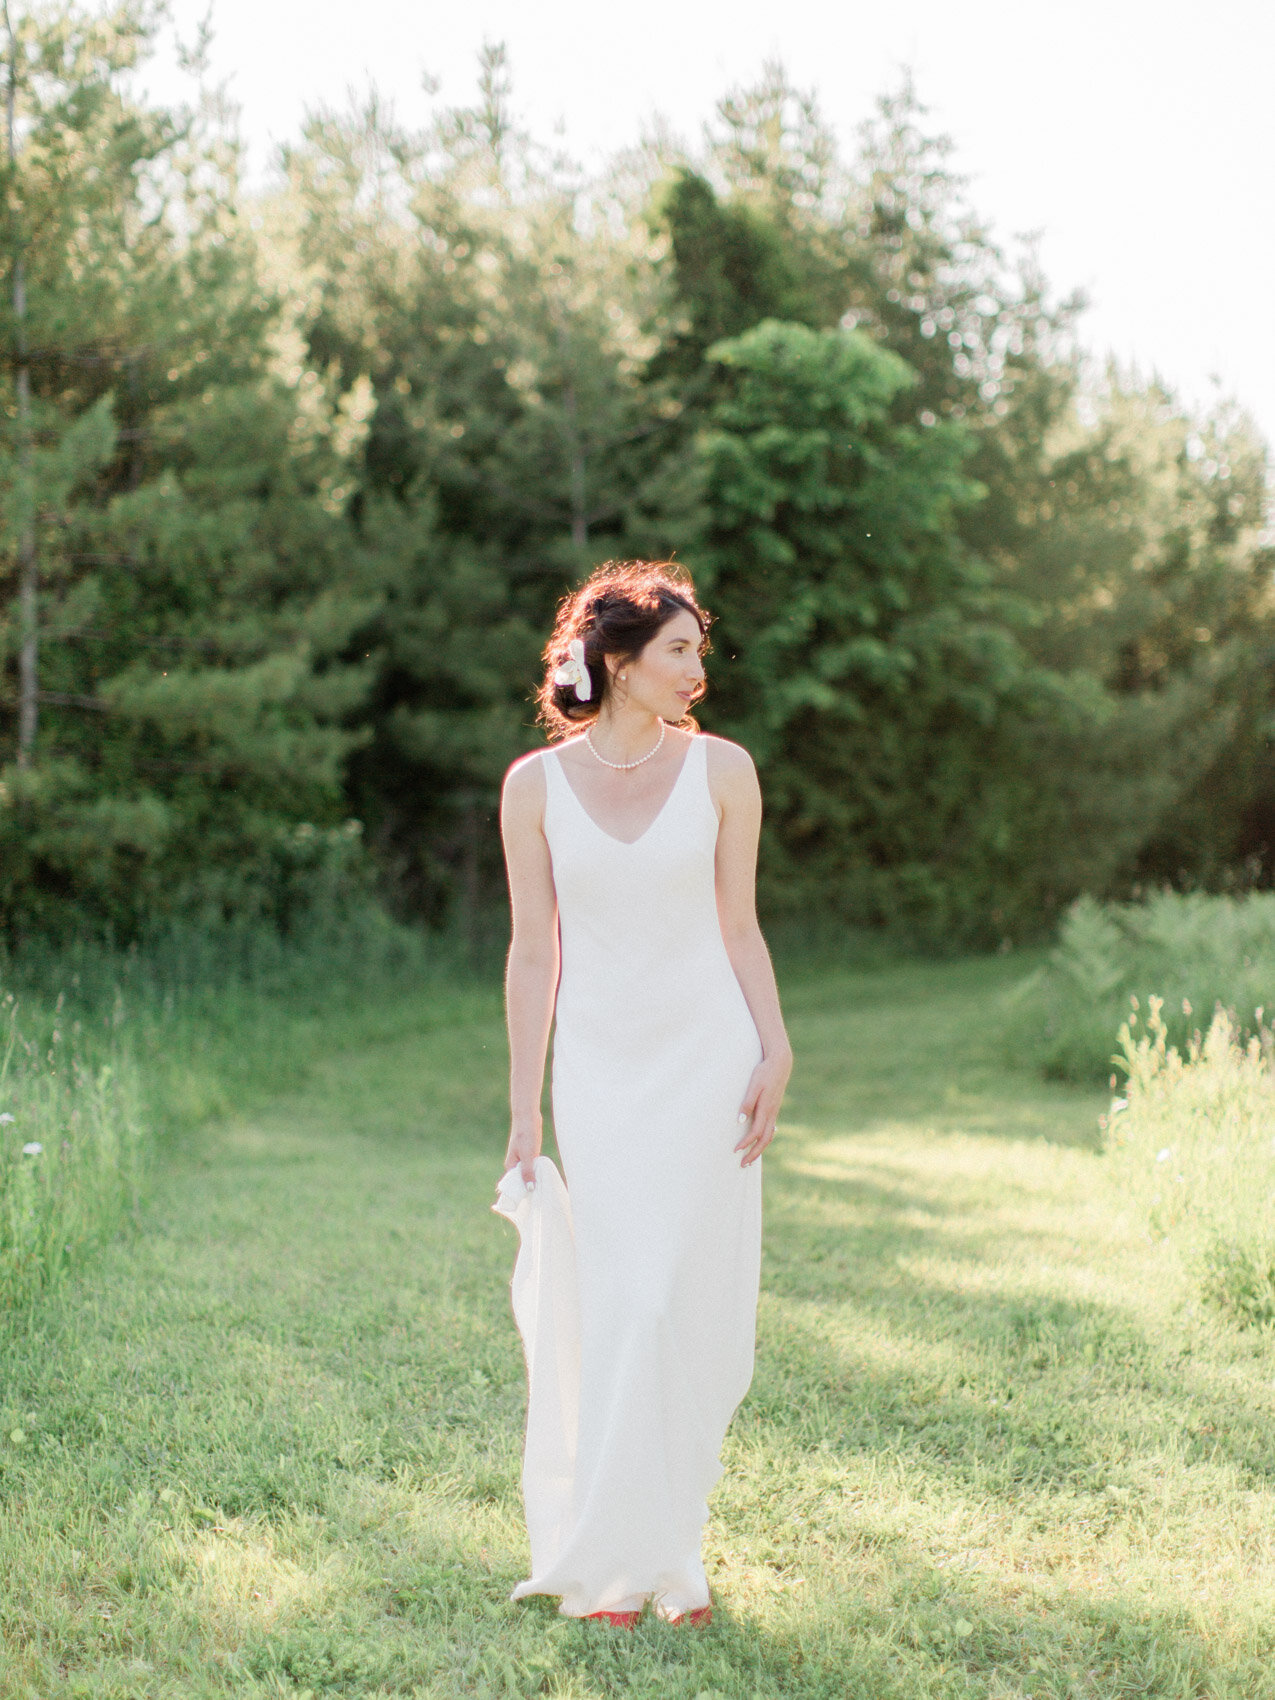 chic bridal style in a simple slip dress with an orchid in her hair.